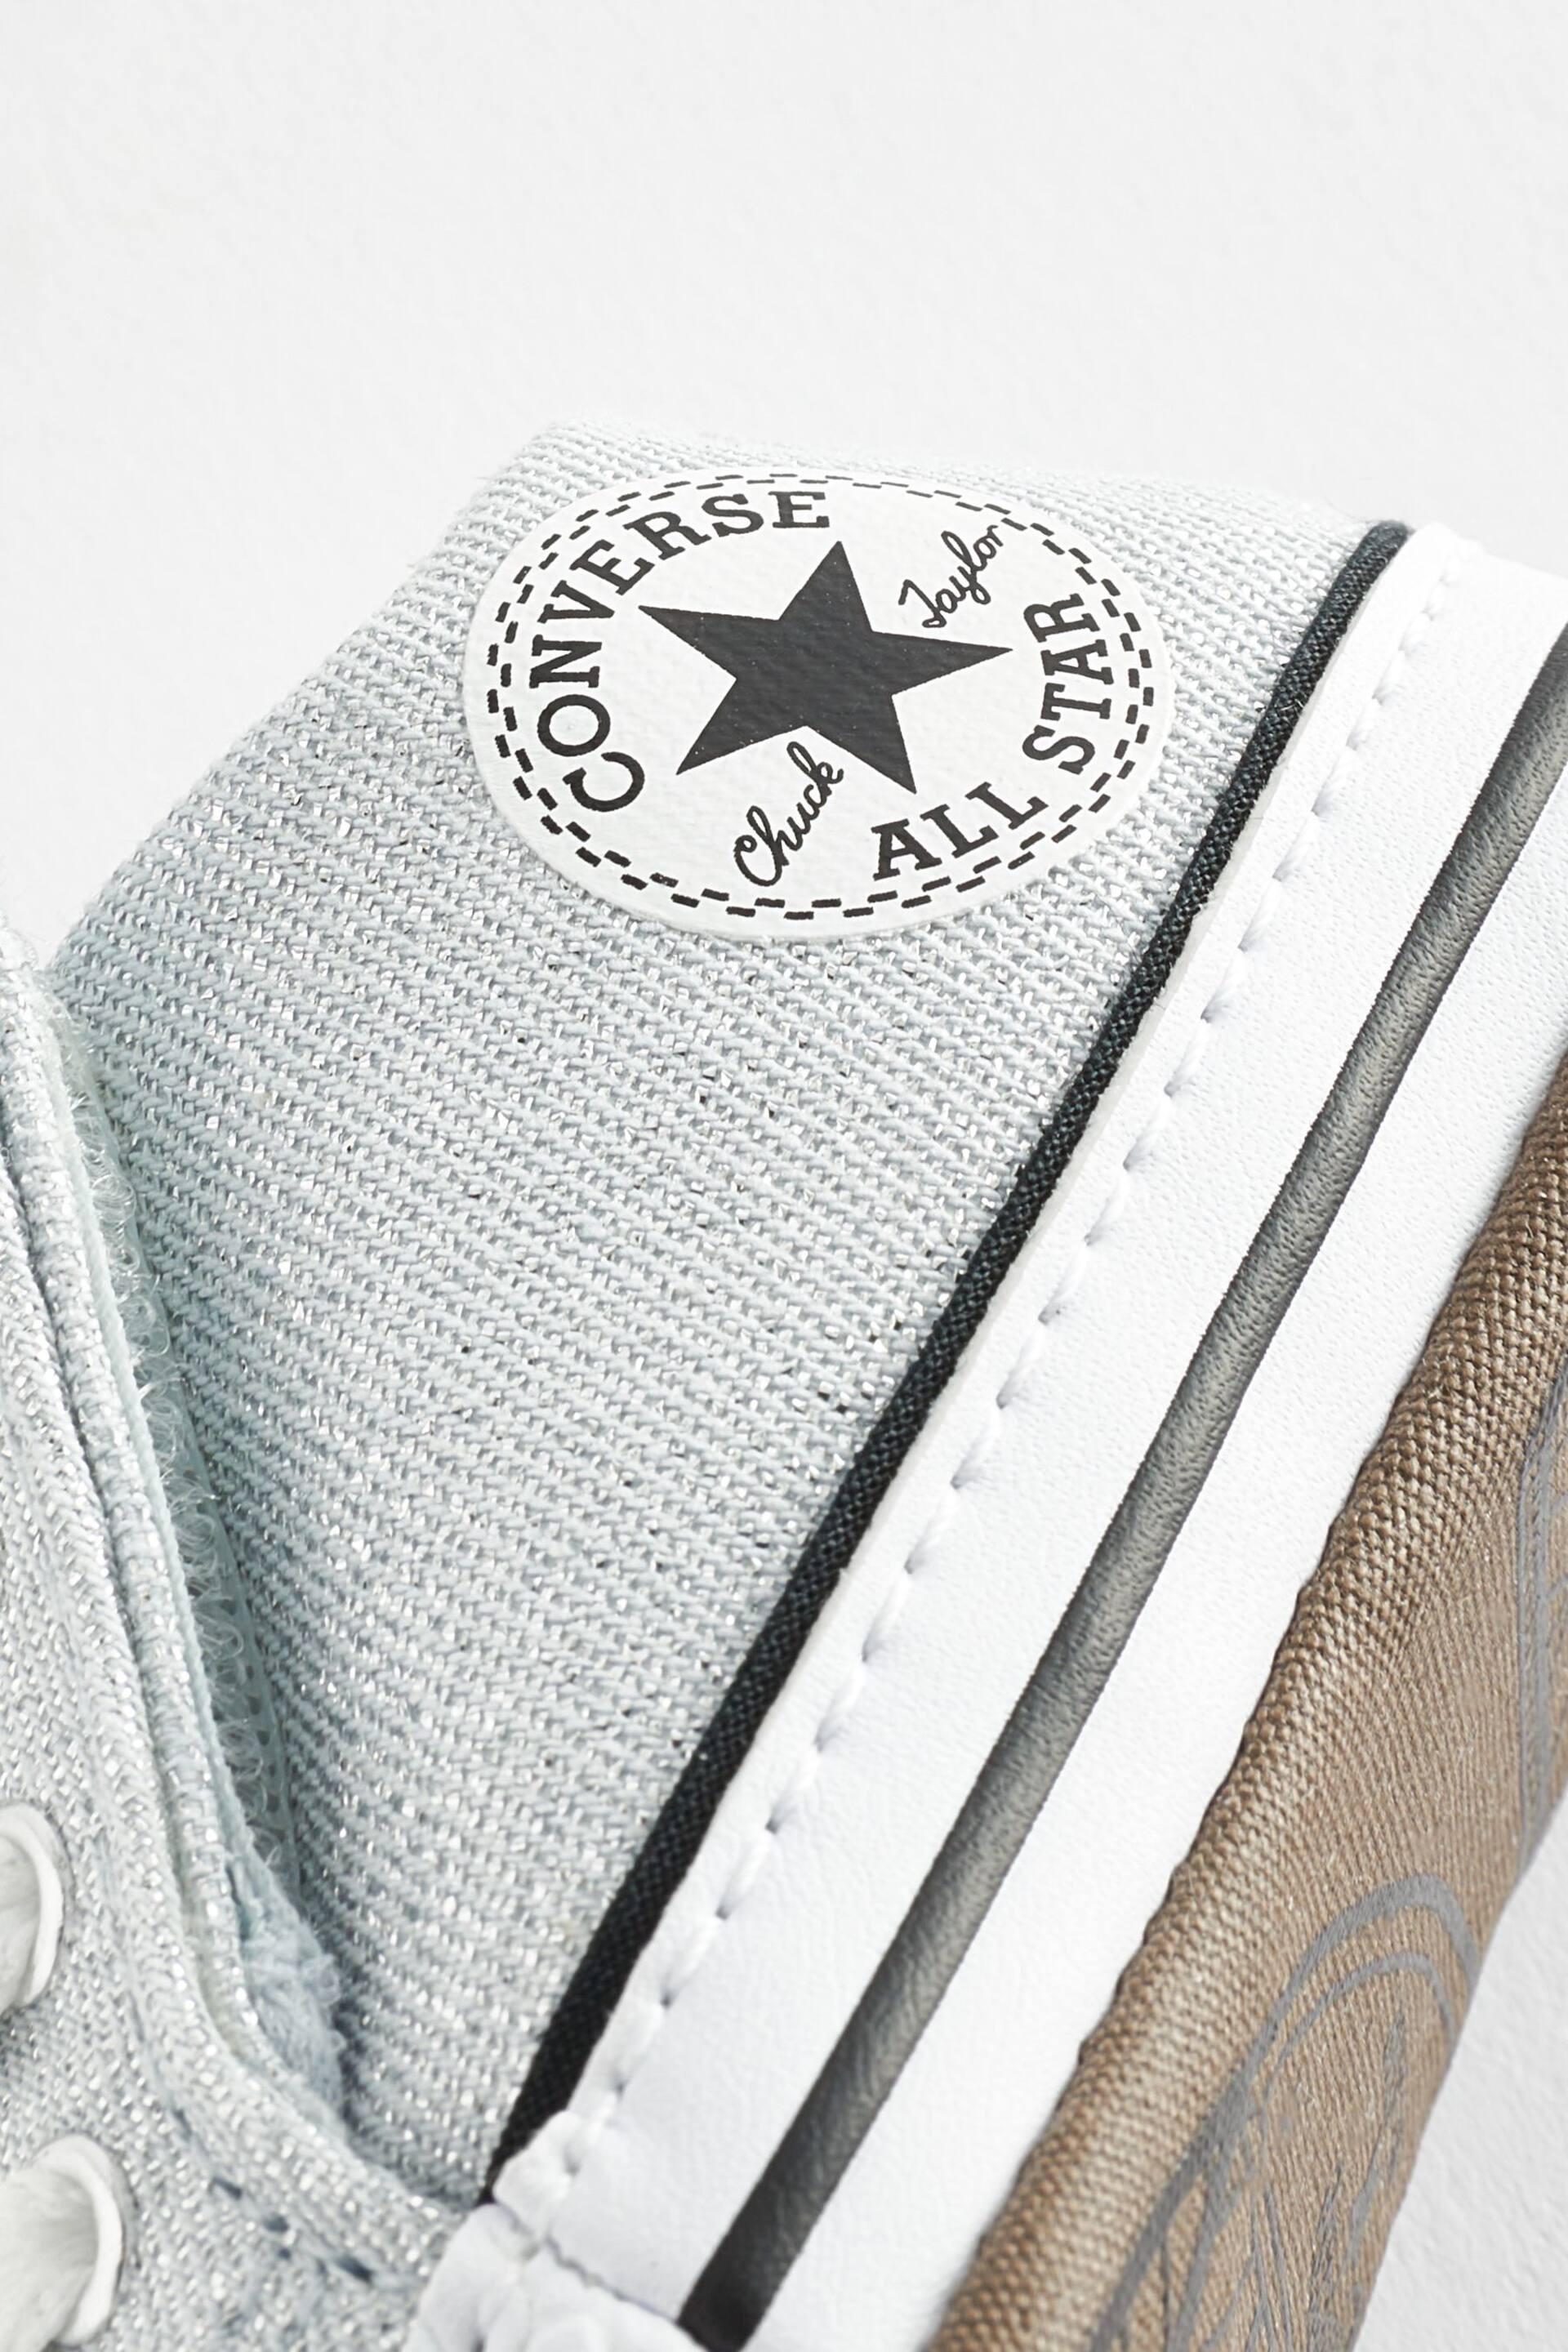 Converse White Chuck Taylor All Star Glitter Pram Shoes - Image 9 of 9